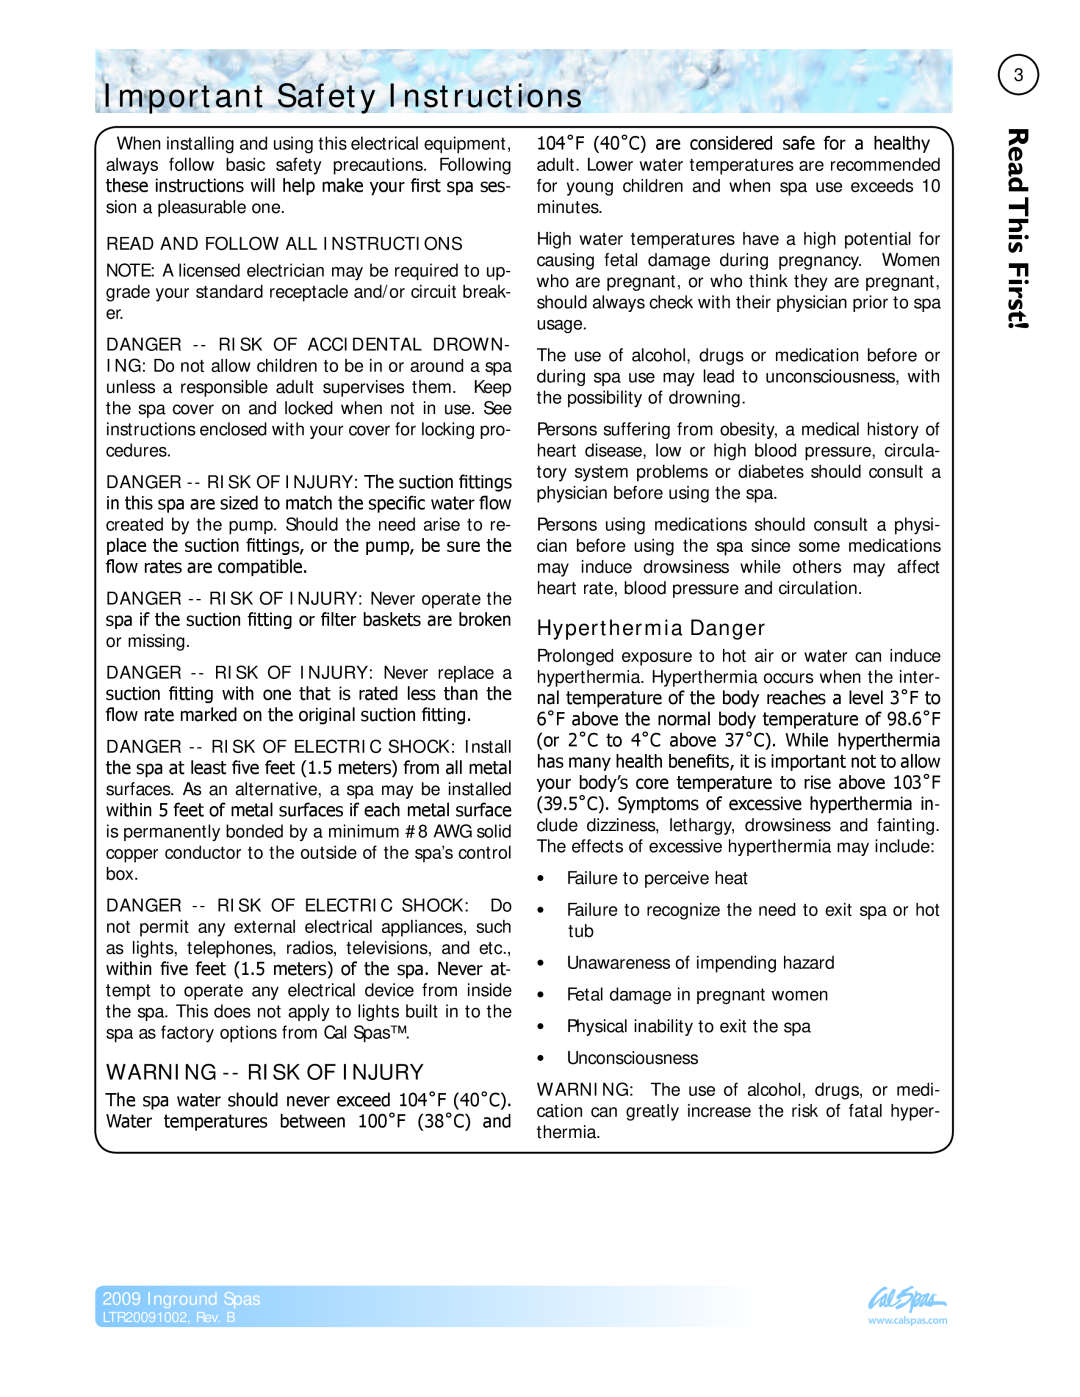 Cal Spas LTR20091002 manual Important Safety Instructions, Read This First, Warning --Risk Of Injury, Hyperthermia Danger 